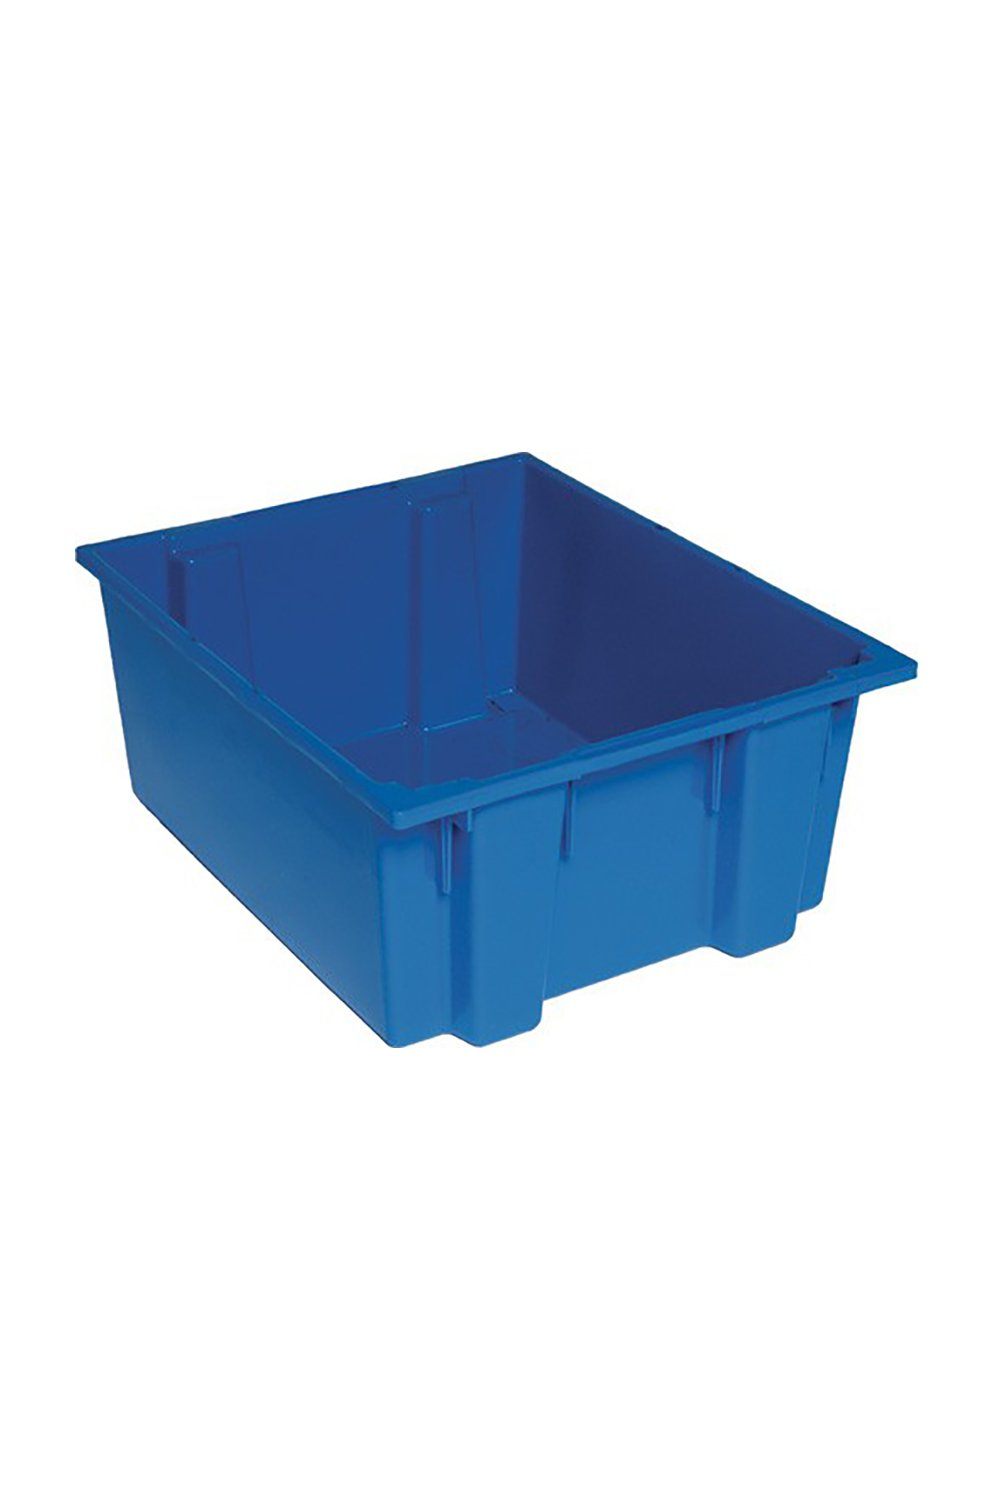 Stack and Nest Tote Bins & Containers Acart 23-1/2"L x 19-1/2"W x 10"H Blue 